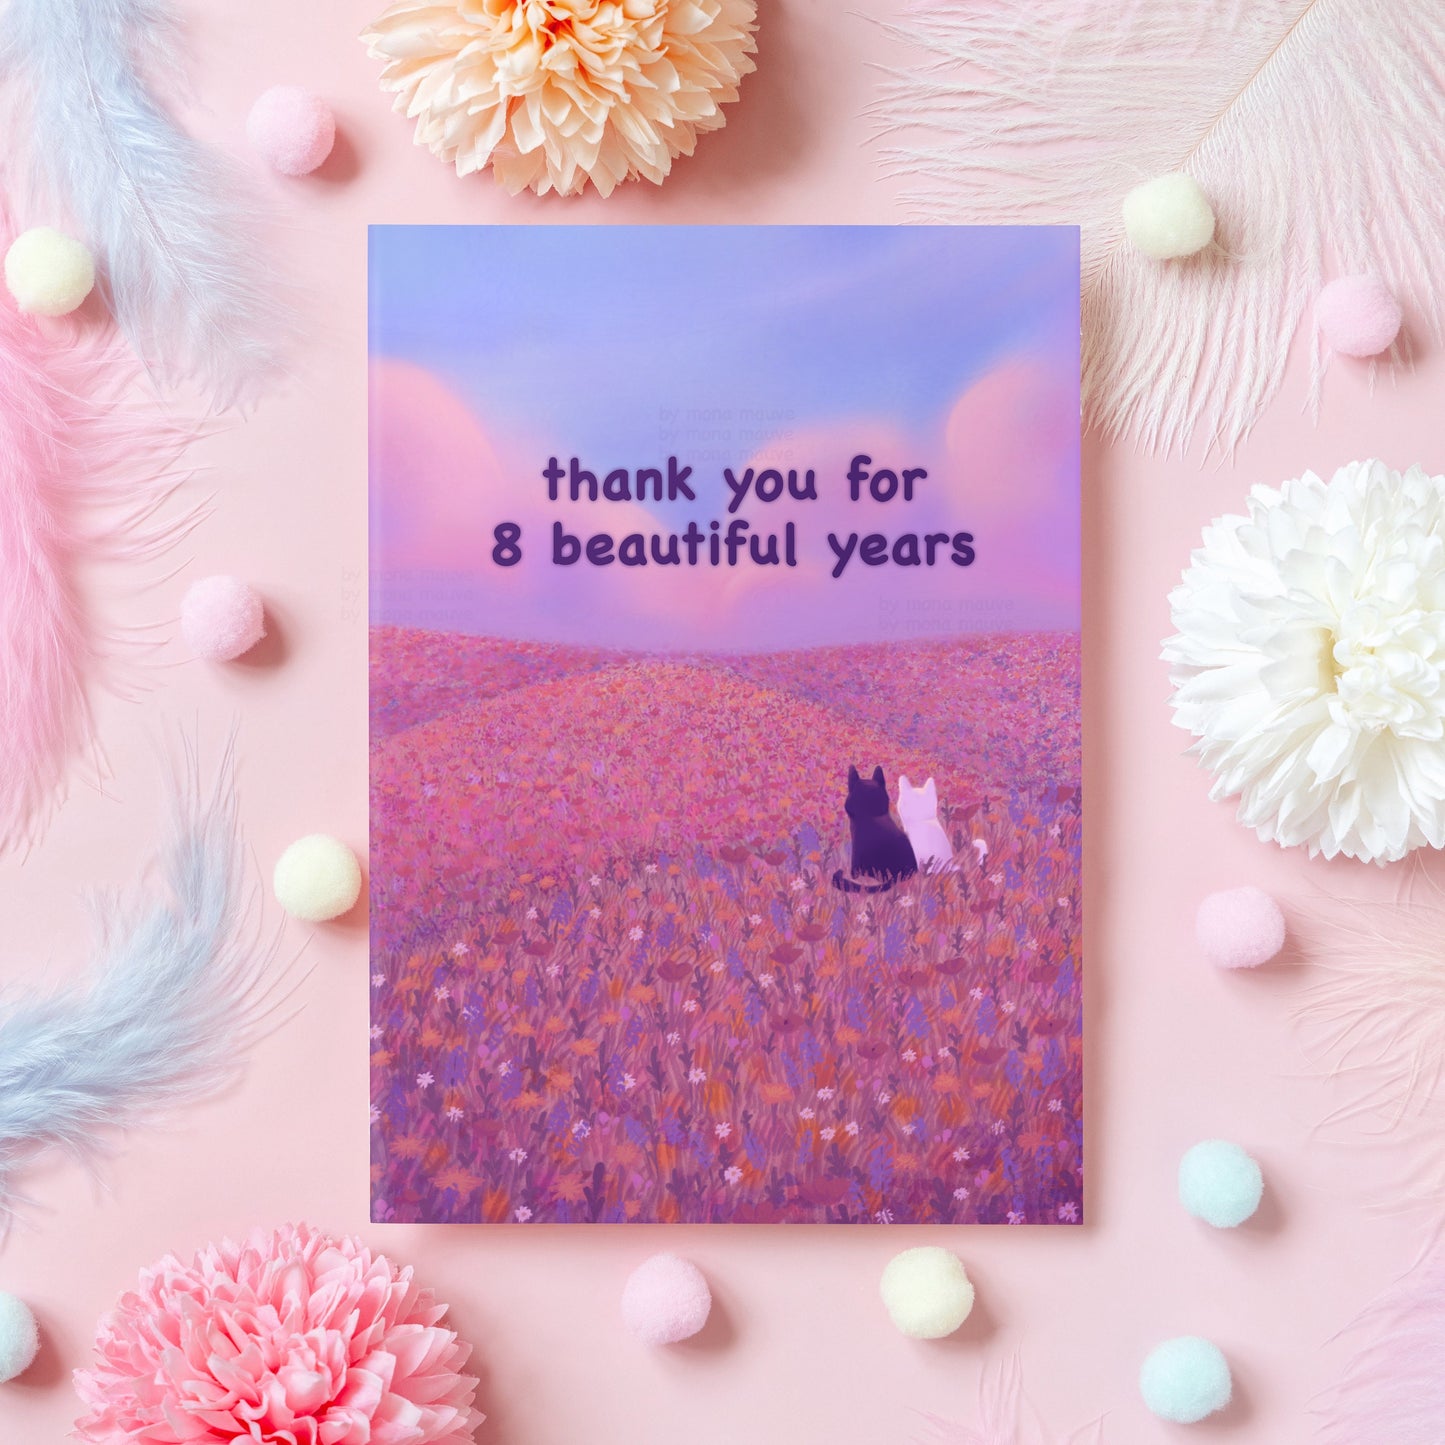 Cute 8th Anniversary Card | Thank You for 8 Beautiful Years | Heartfelt Gift for Husband, Wife, Boyfriend, Girlfriend - Her or Him